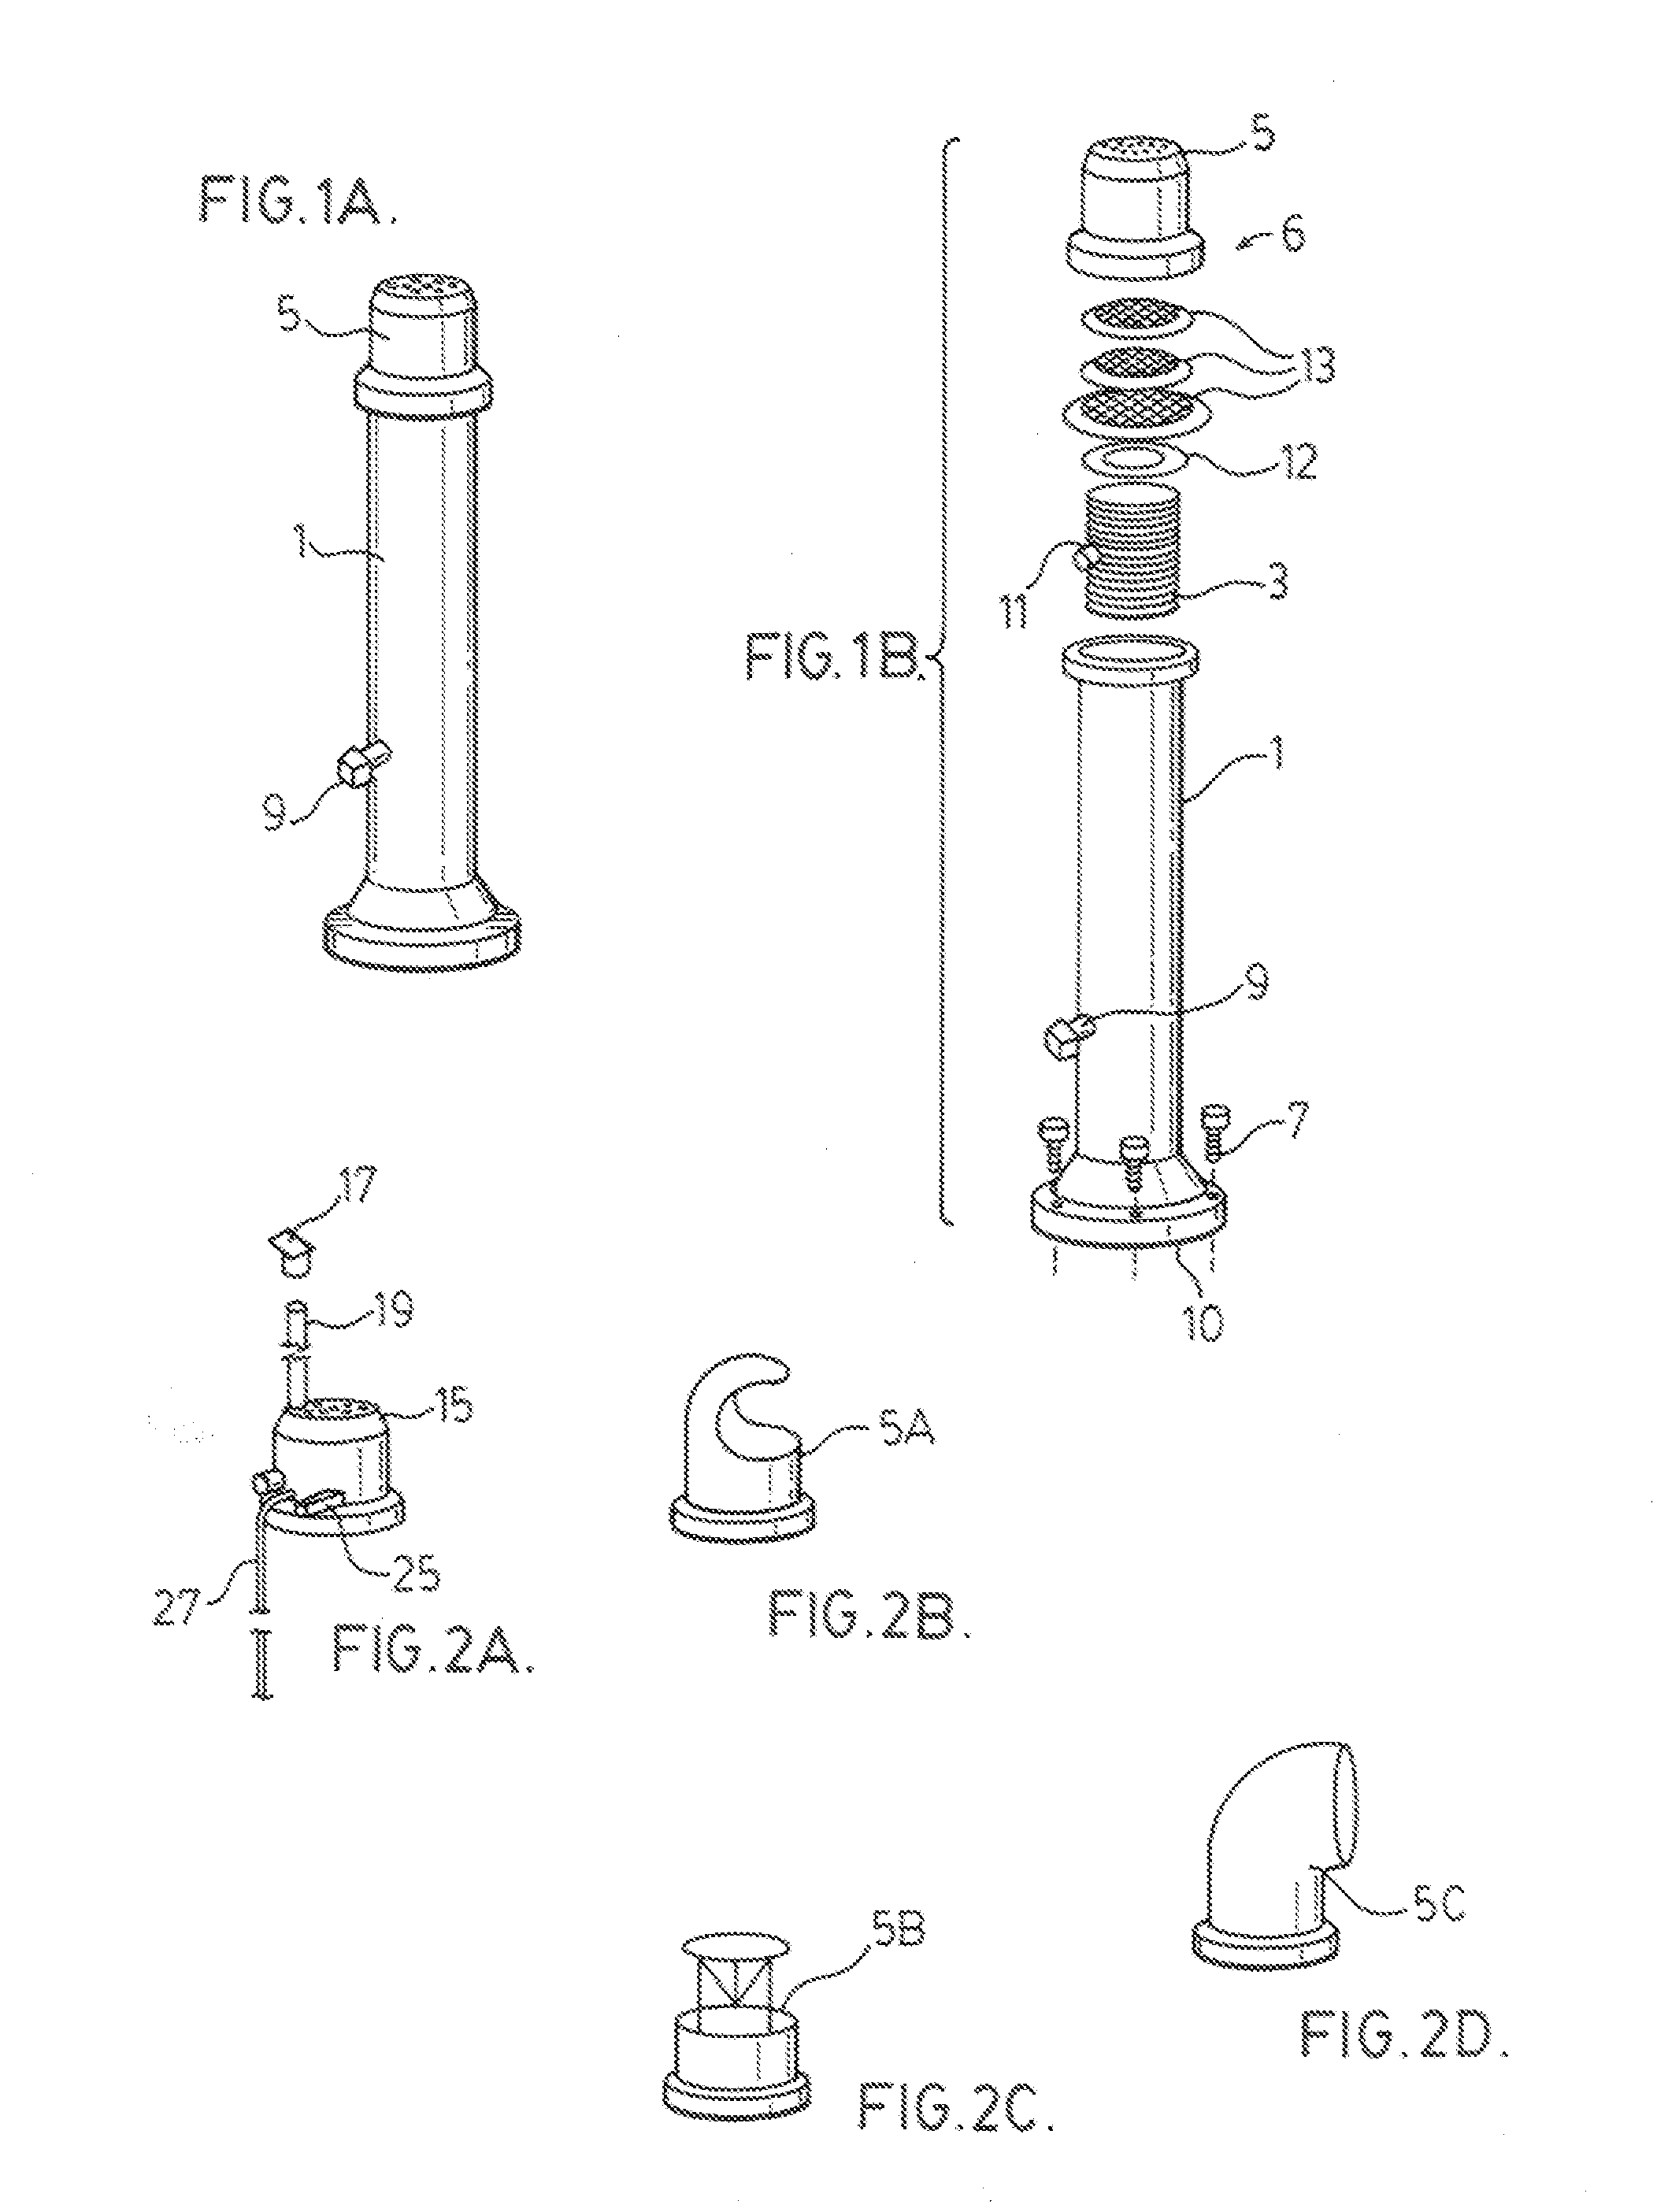 System and method for sodium azide based suppression of fires